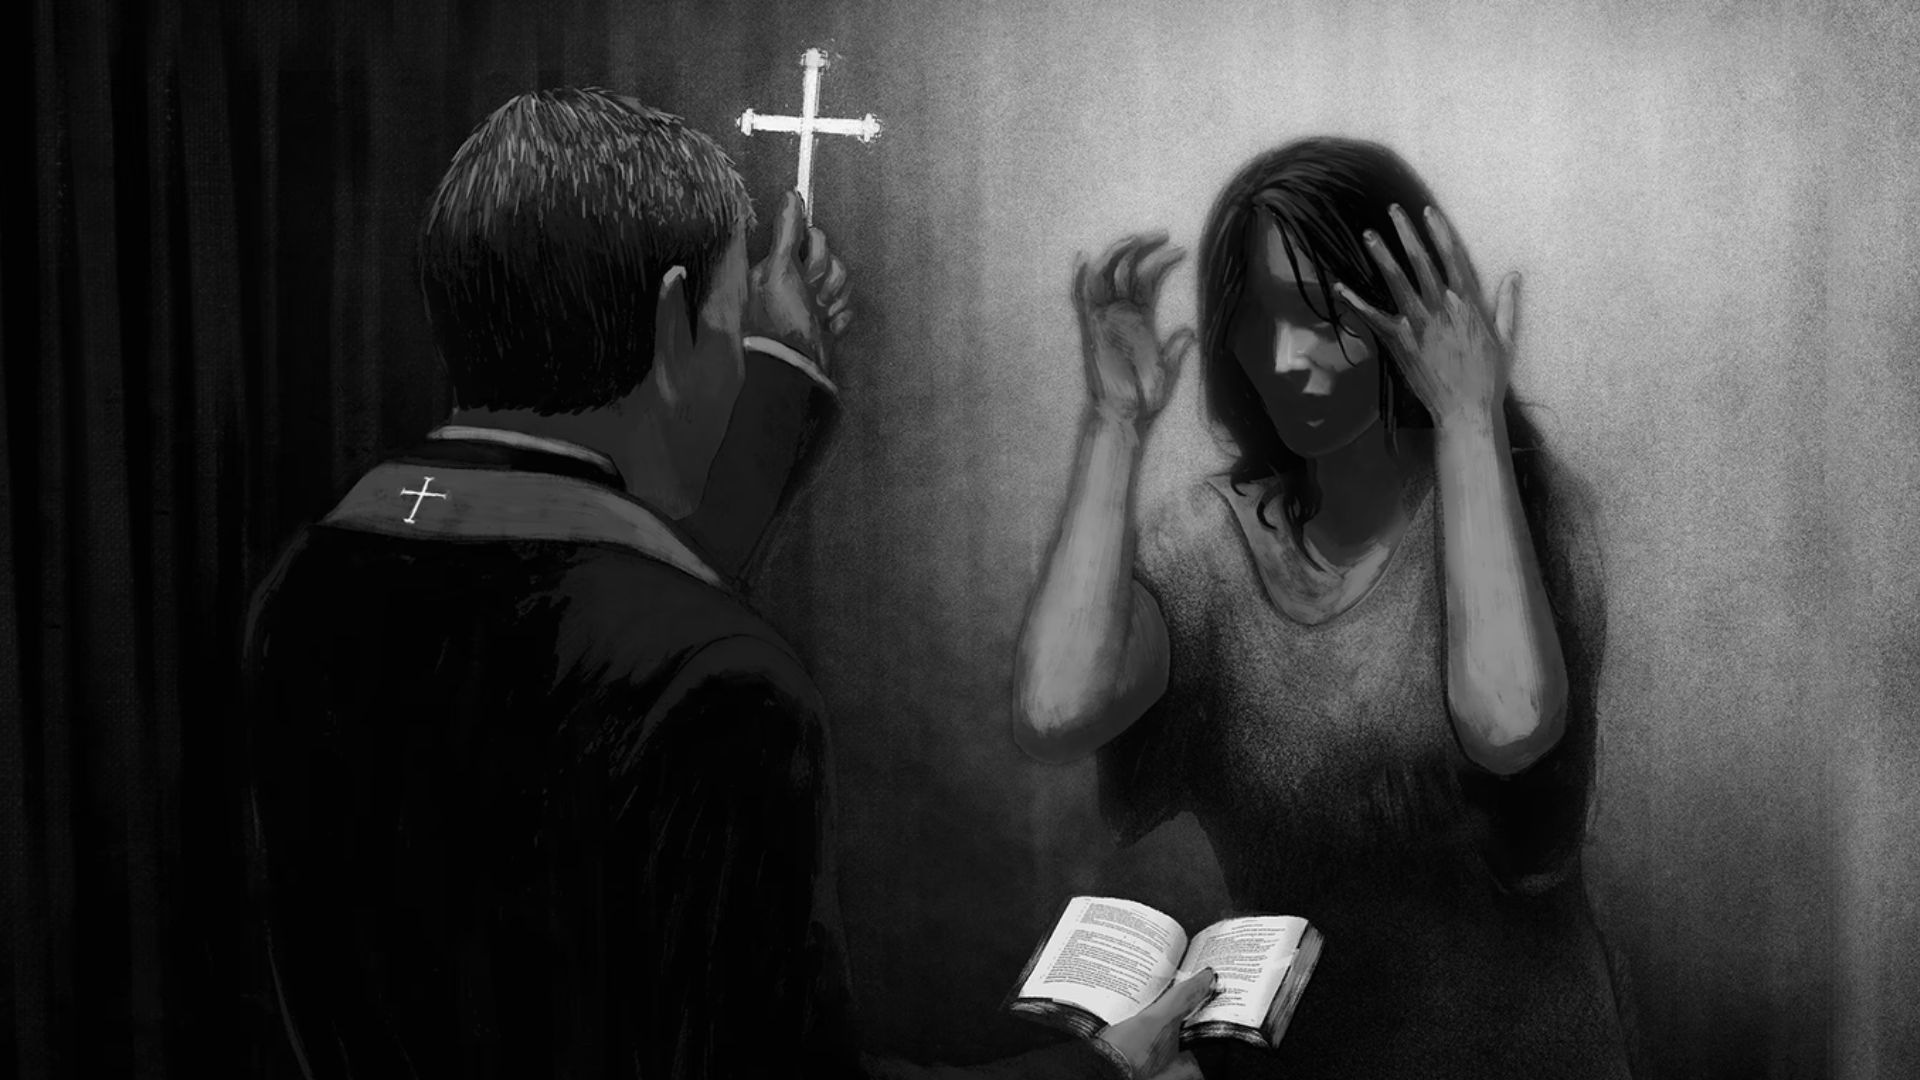 Priest Showing Cross And Bible To A Scared Woman